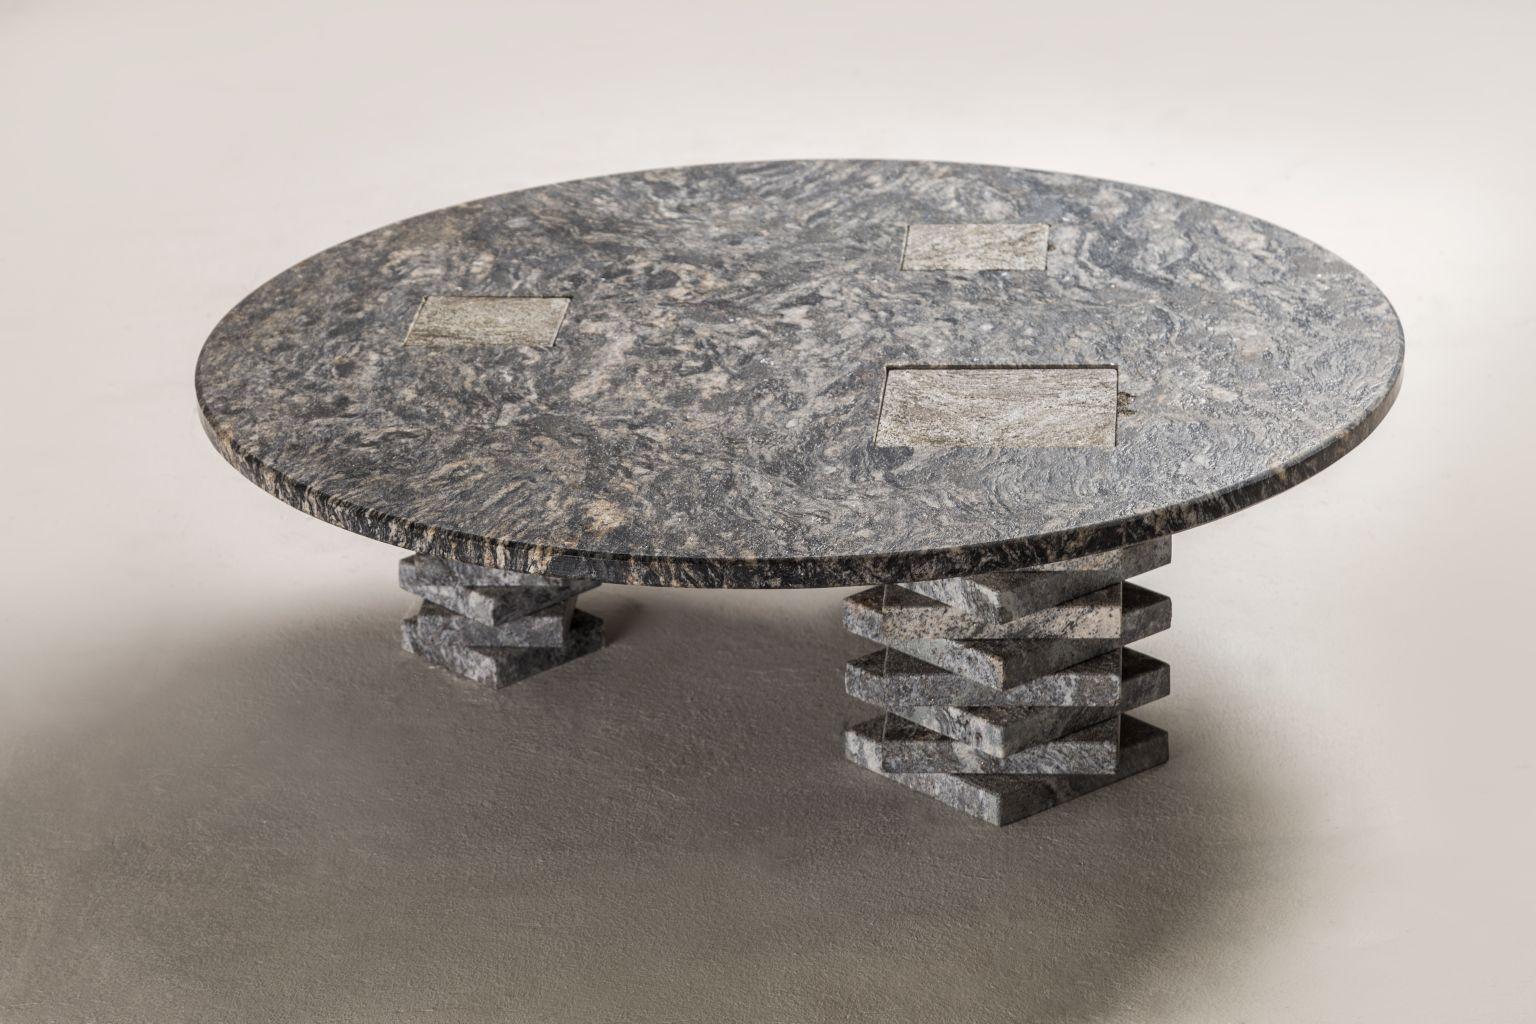 Boreal low table 38 by Cristián Mohaded
Limited Edition
Dimensions: 90 D x 38 H cm
Materials: Brushed Boreal Granite

This Brutalist table combines its elements mathematically to create a three-dimensional texture. The use of different finishes